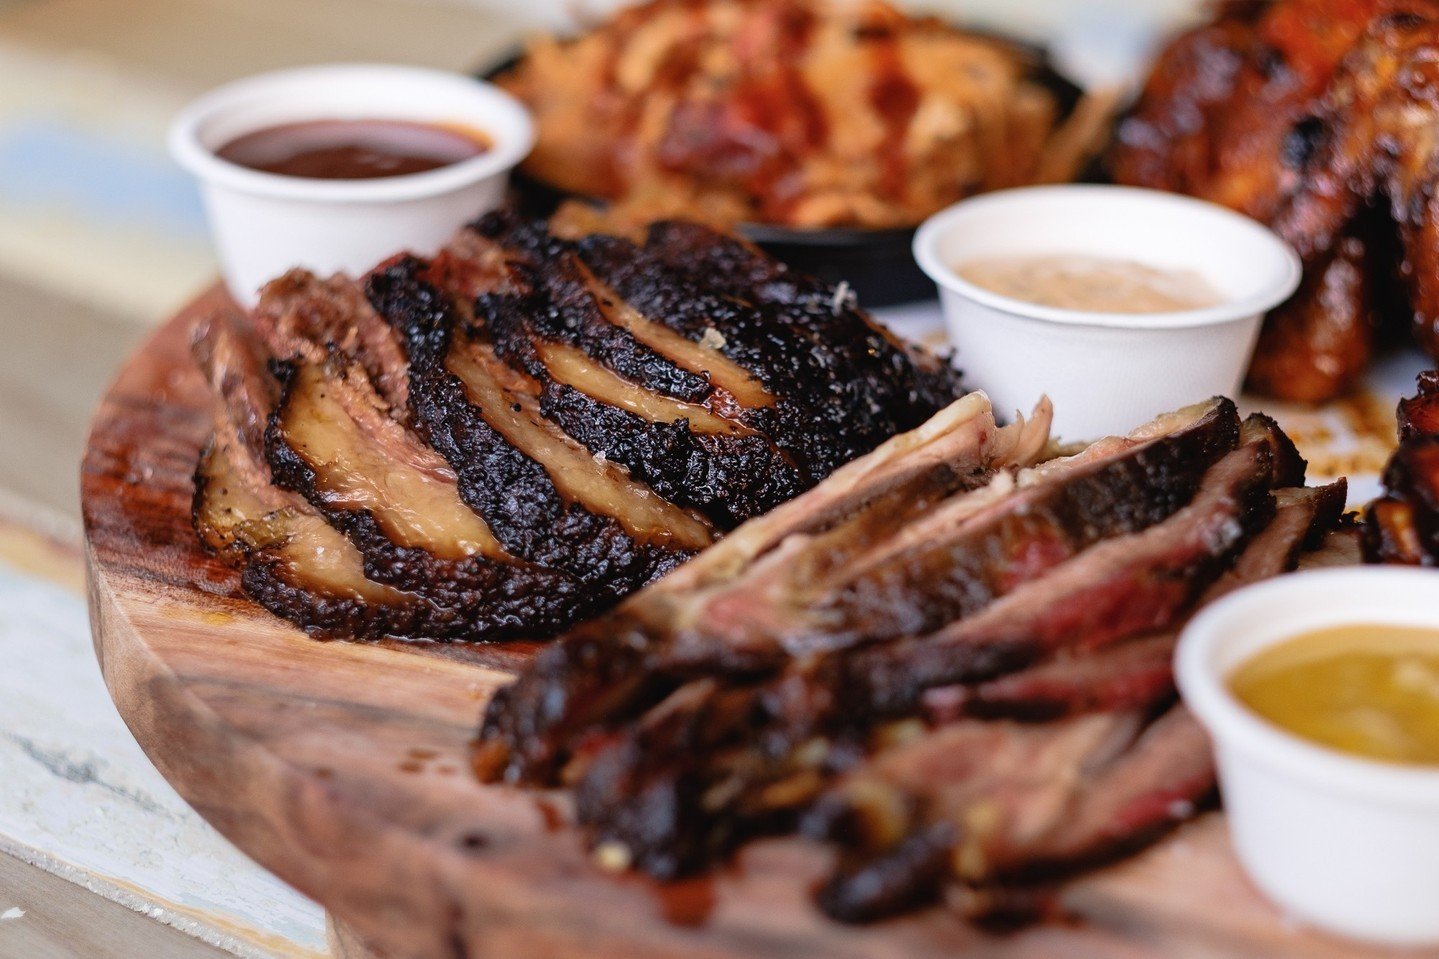 Our meatboards are a great way to sample a range of our delicious smoked meats! ⁠
⁠
Served with fries, slaw, &amp; pickles and available small or large.